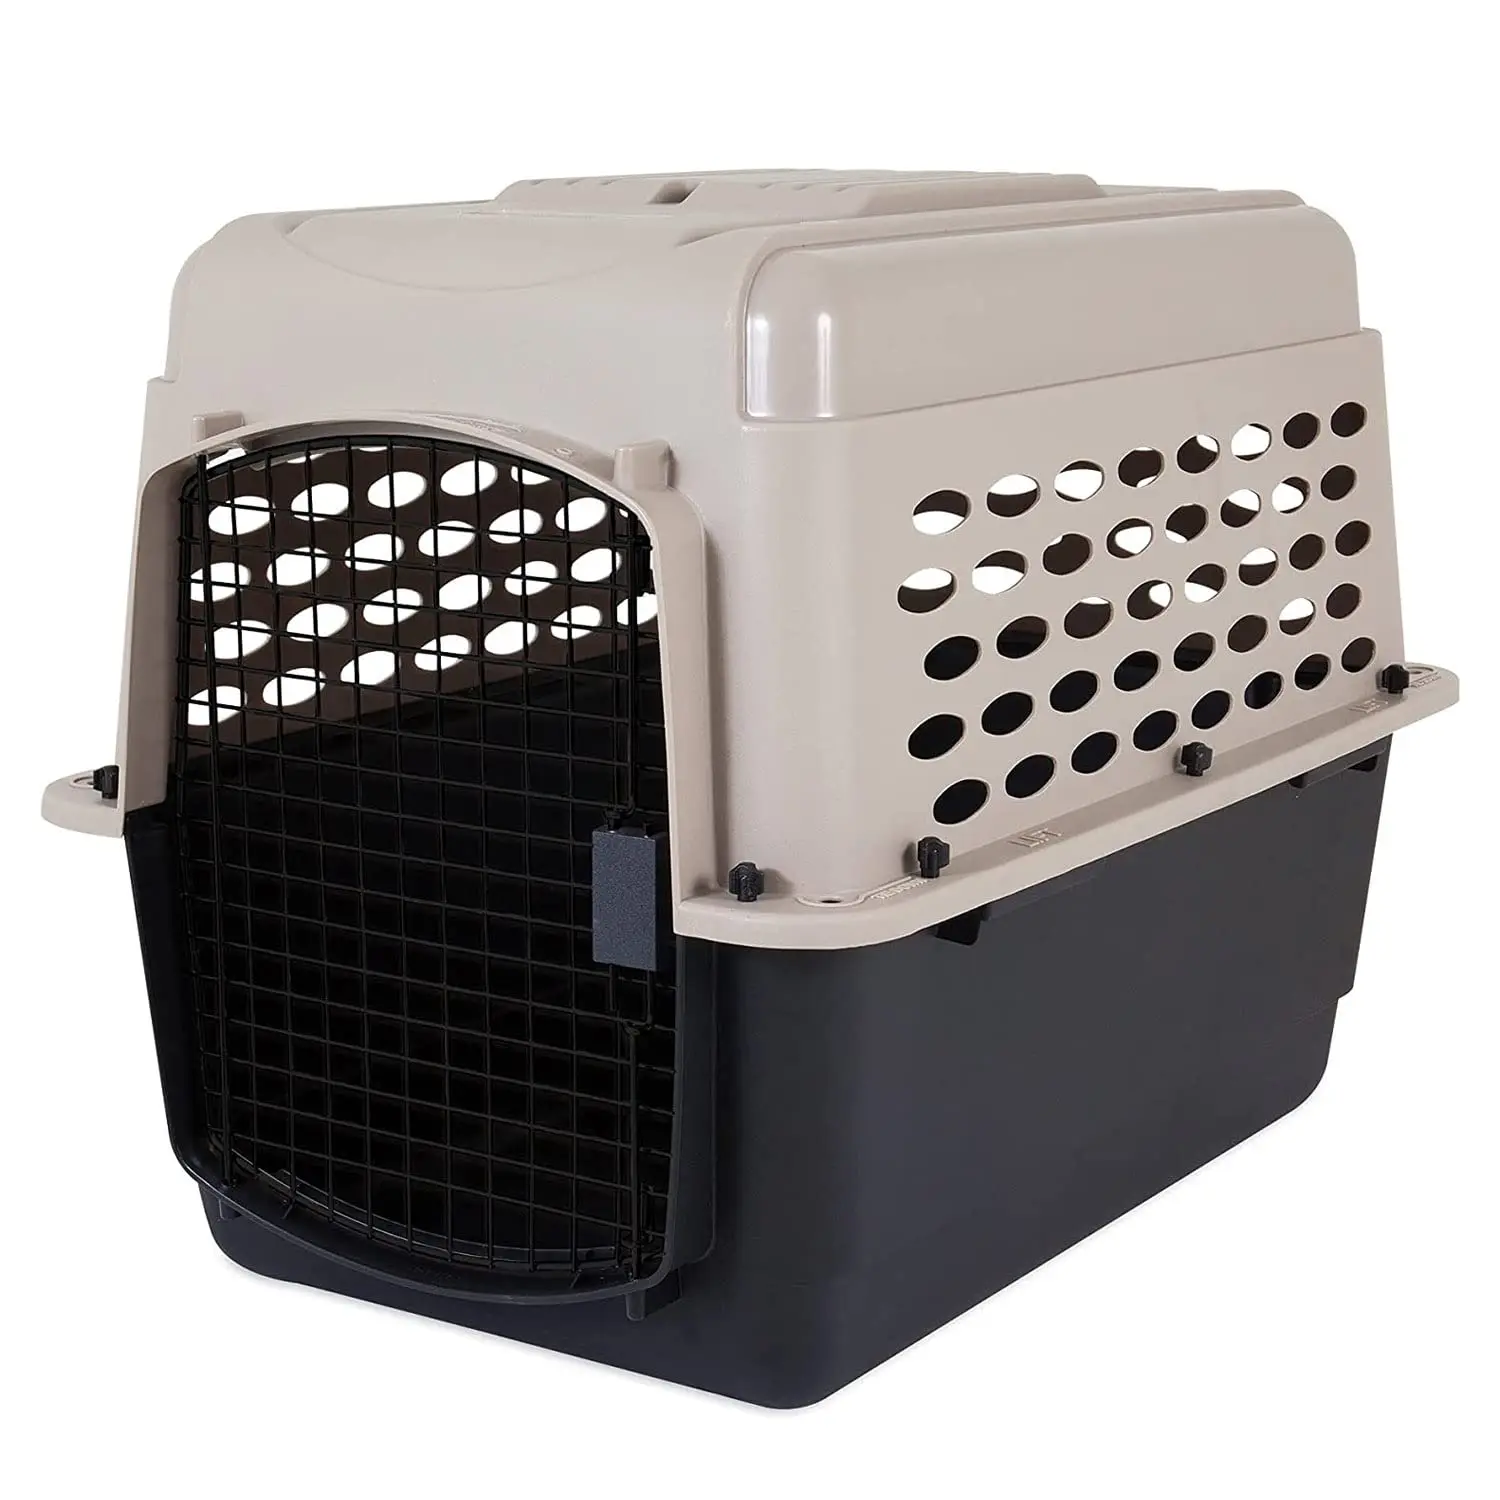 

Taupe & Black Dog Kennel: Portable Crate for Pets 30-50lbs (32.0"L x 22.5"W x 24.0"H - Kennel Only)